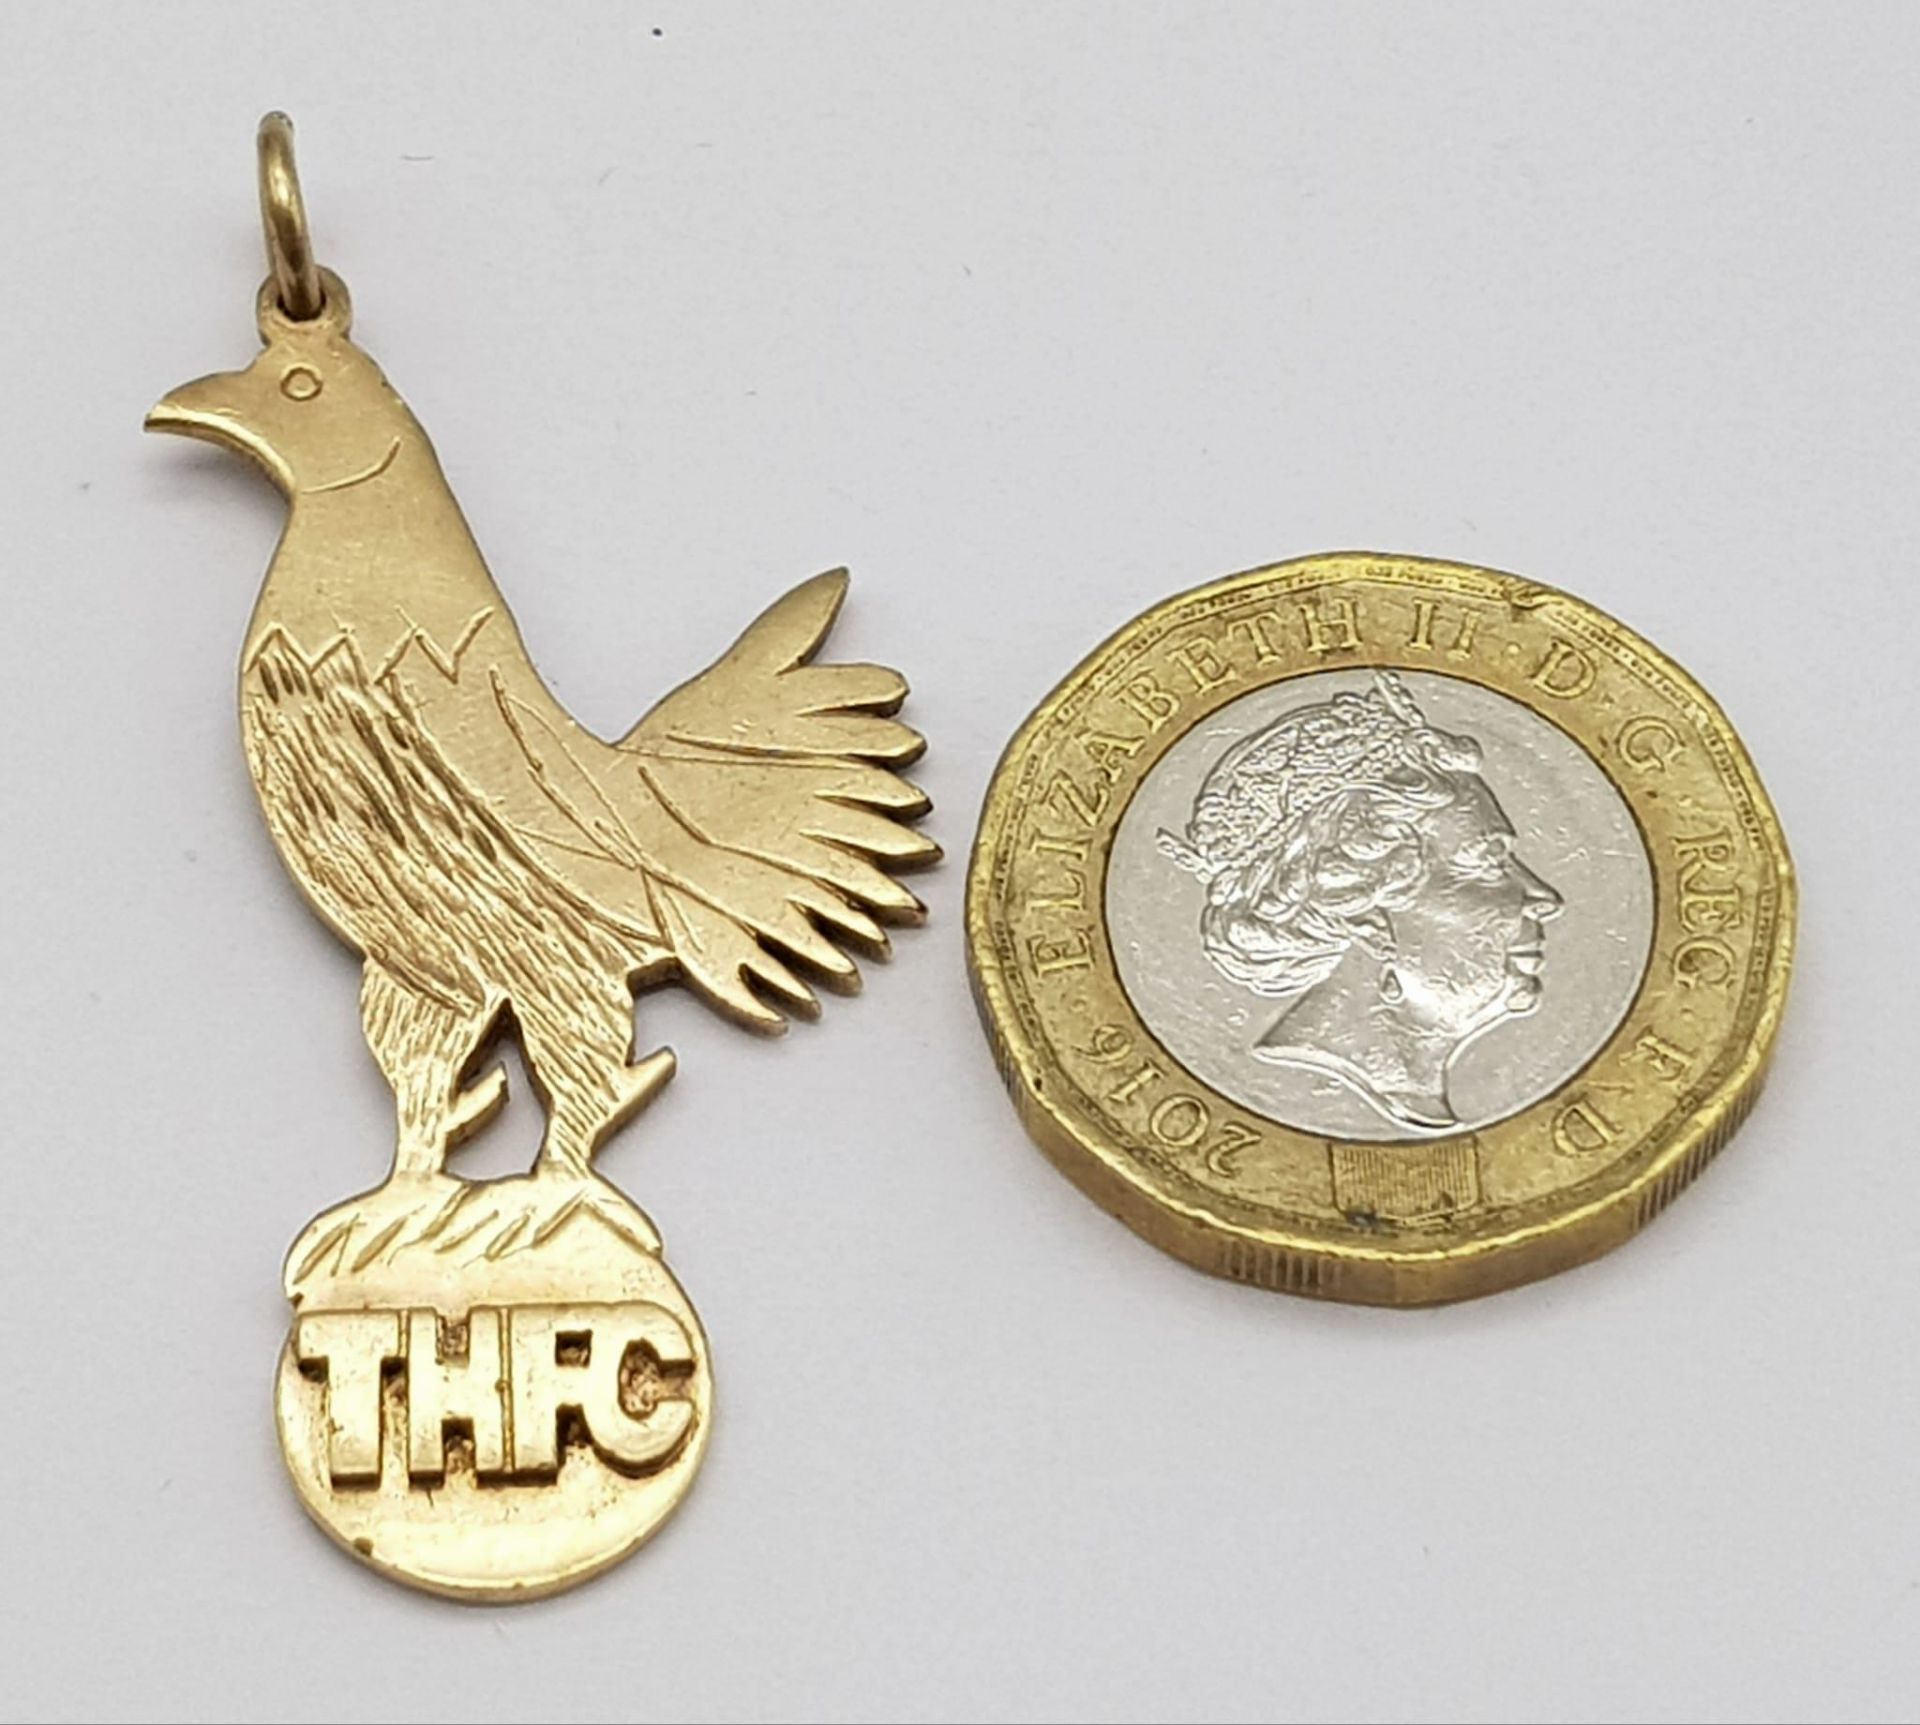 9K YELLOW GOLD TOTTENHAM HOTSPUR PENDANT ENGRAVED THFC, WEIGHT 5.3G, 4.5CM LONG APPROX - Image 4 of 4